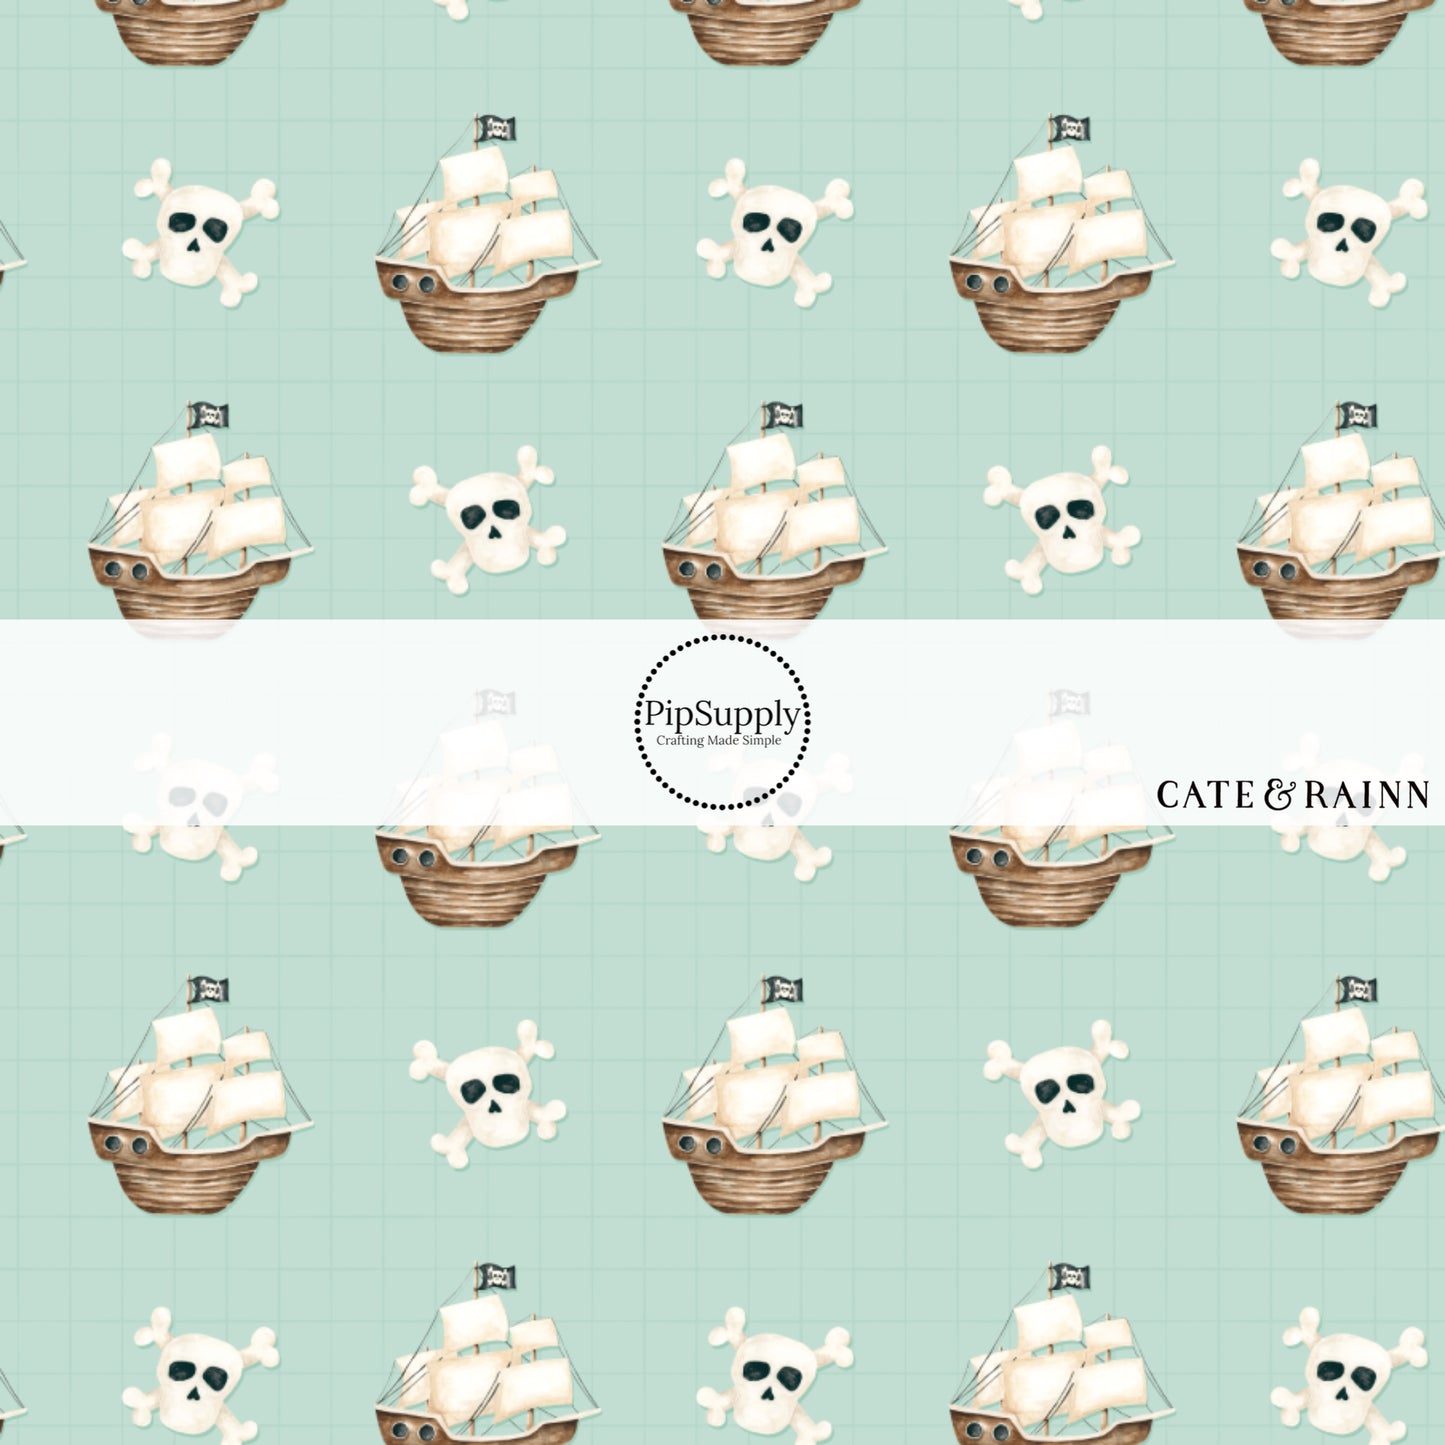 These pirate ship themed light blue fabric by the yard features crossbones, skulls, and pirate ships on light blue. This fun themed fabric can be used for all your sewing and crafting needs! 